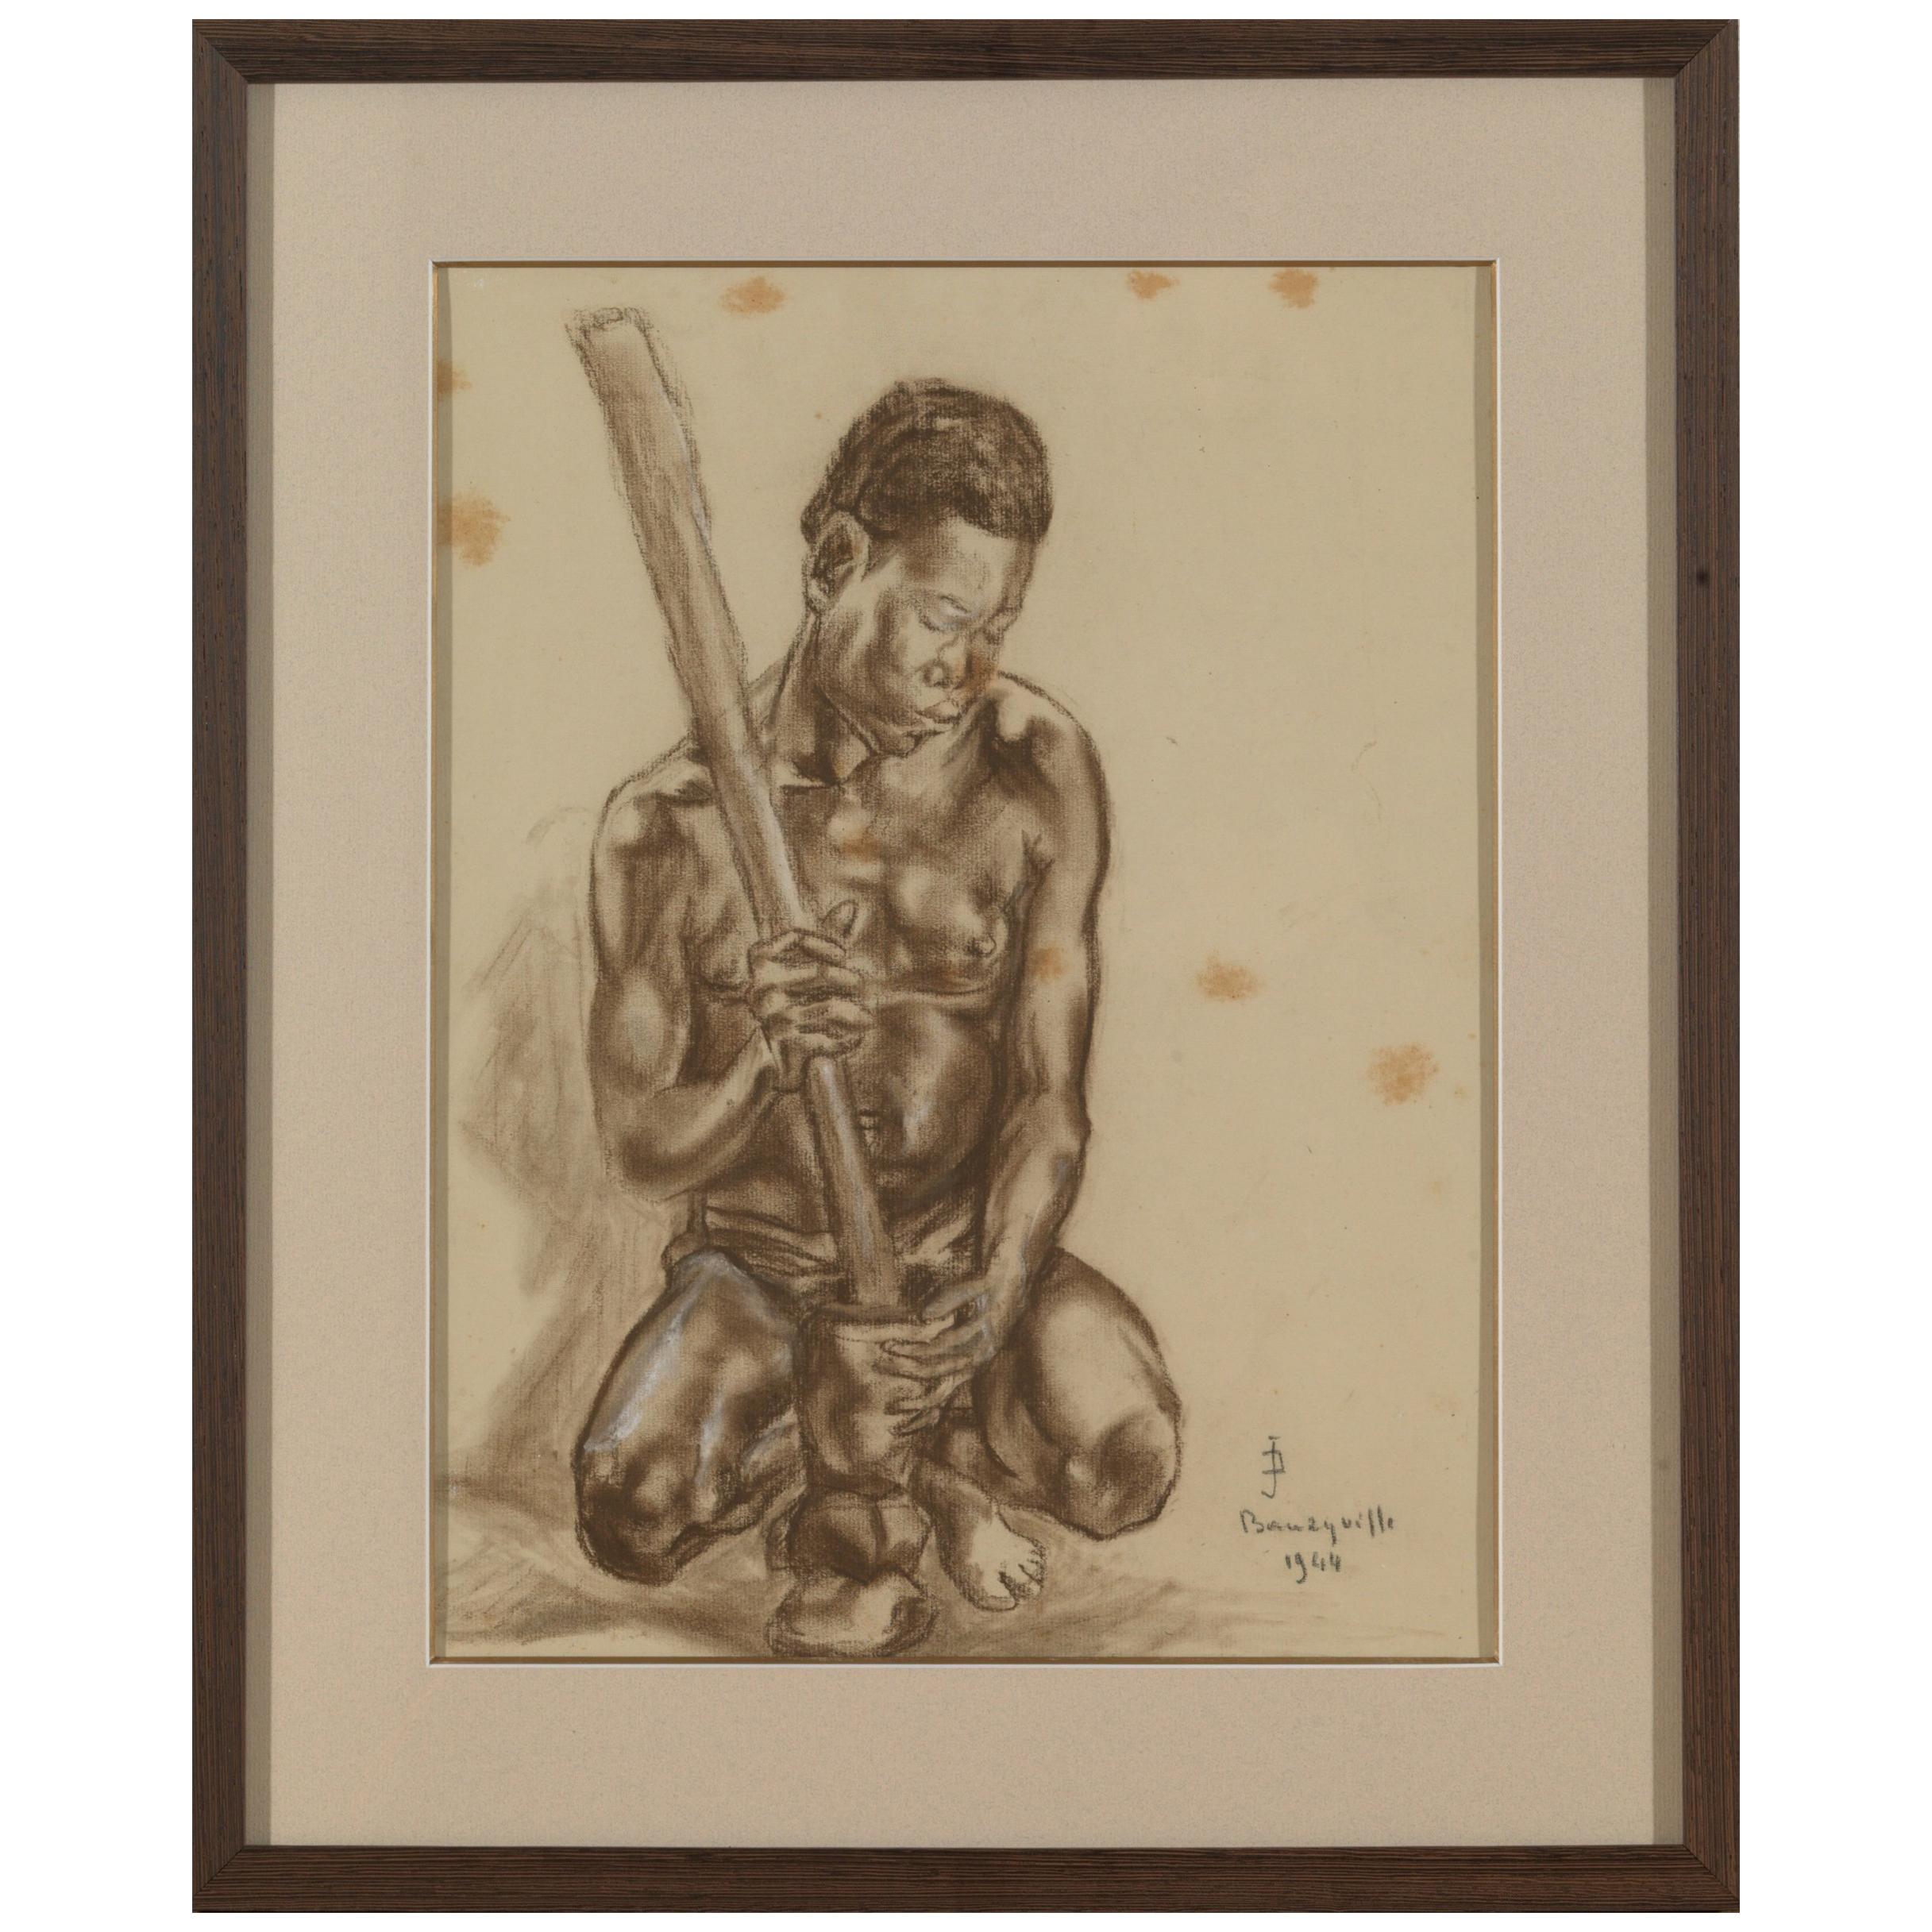 Portait of African Male, Charcoal on Paper, Signed Banzyville, 1944